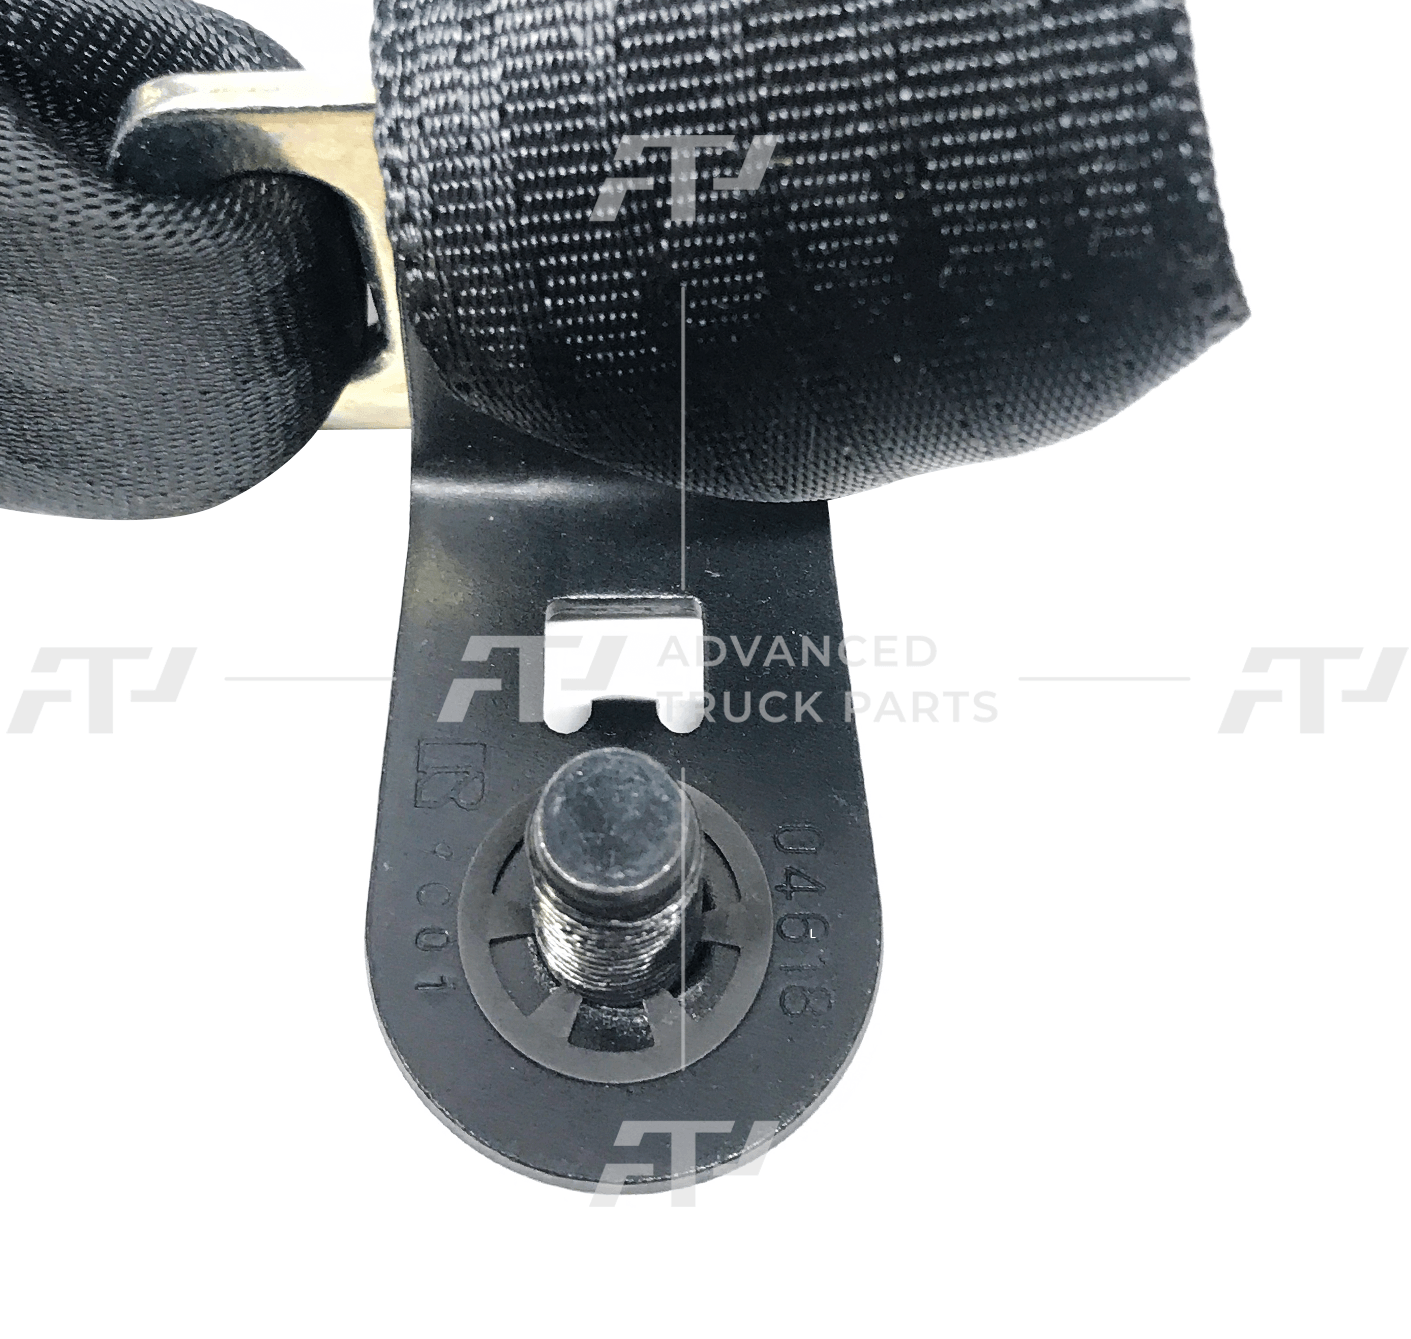 73120-E0200 Genuine Hino® Front Seat Belt 3 Point - ADVANCED TRUCK PARTS